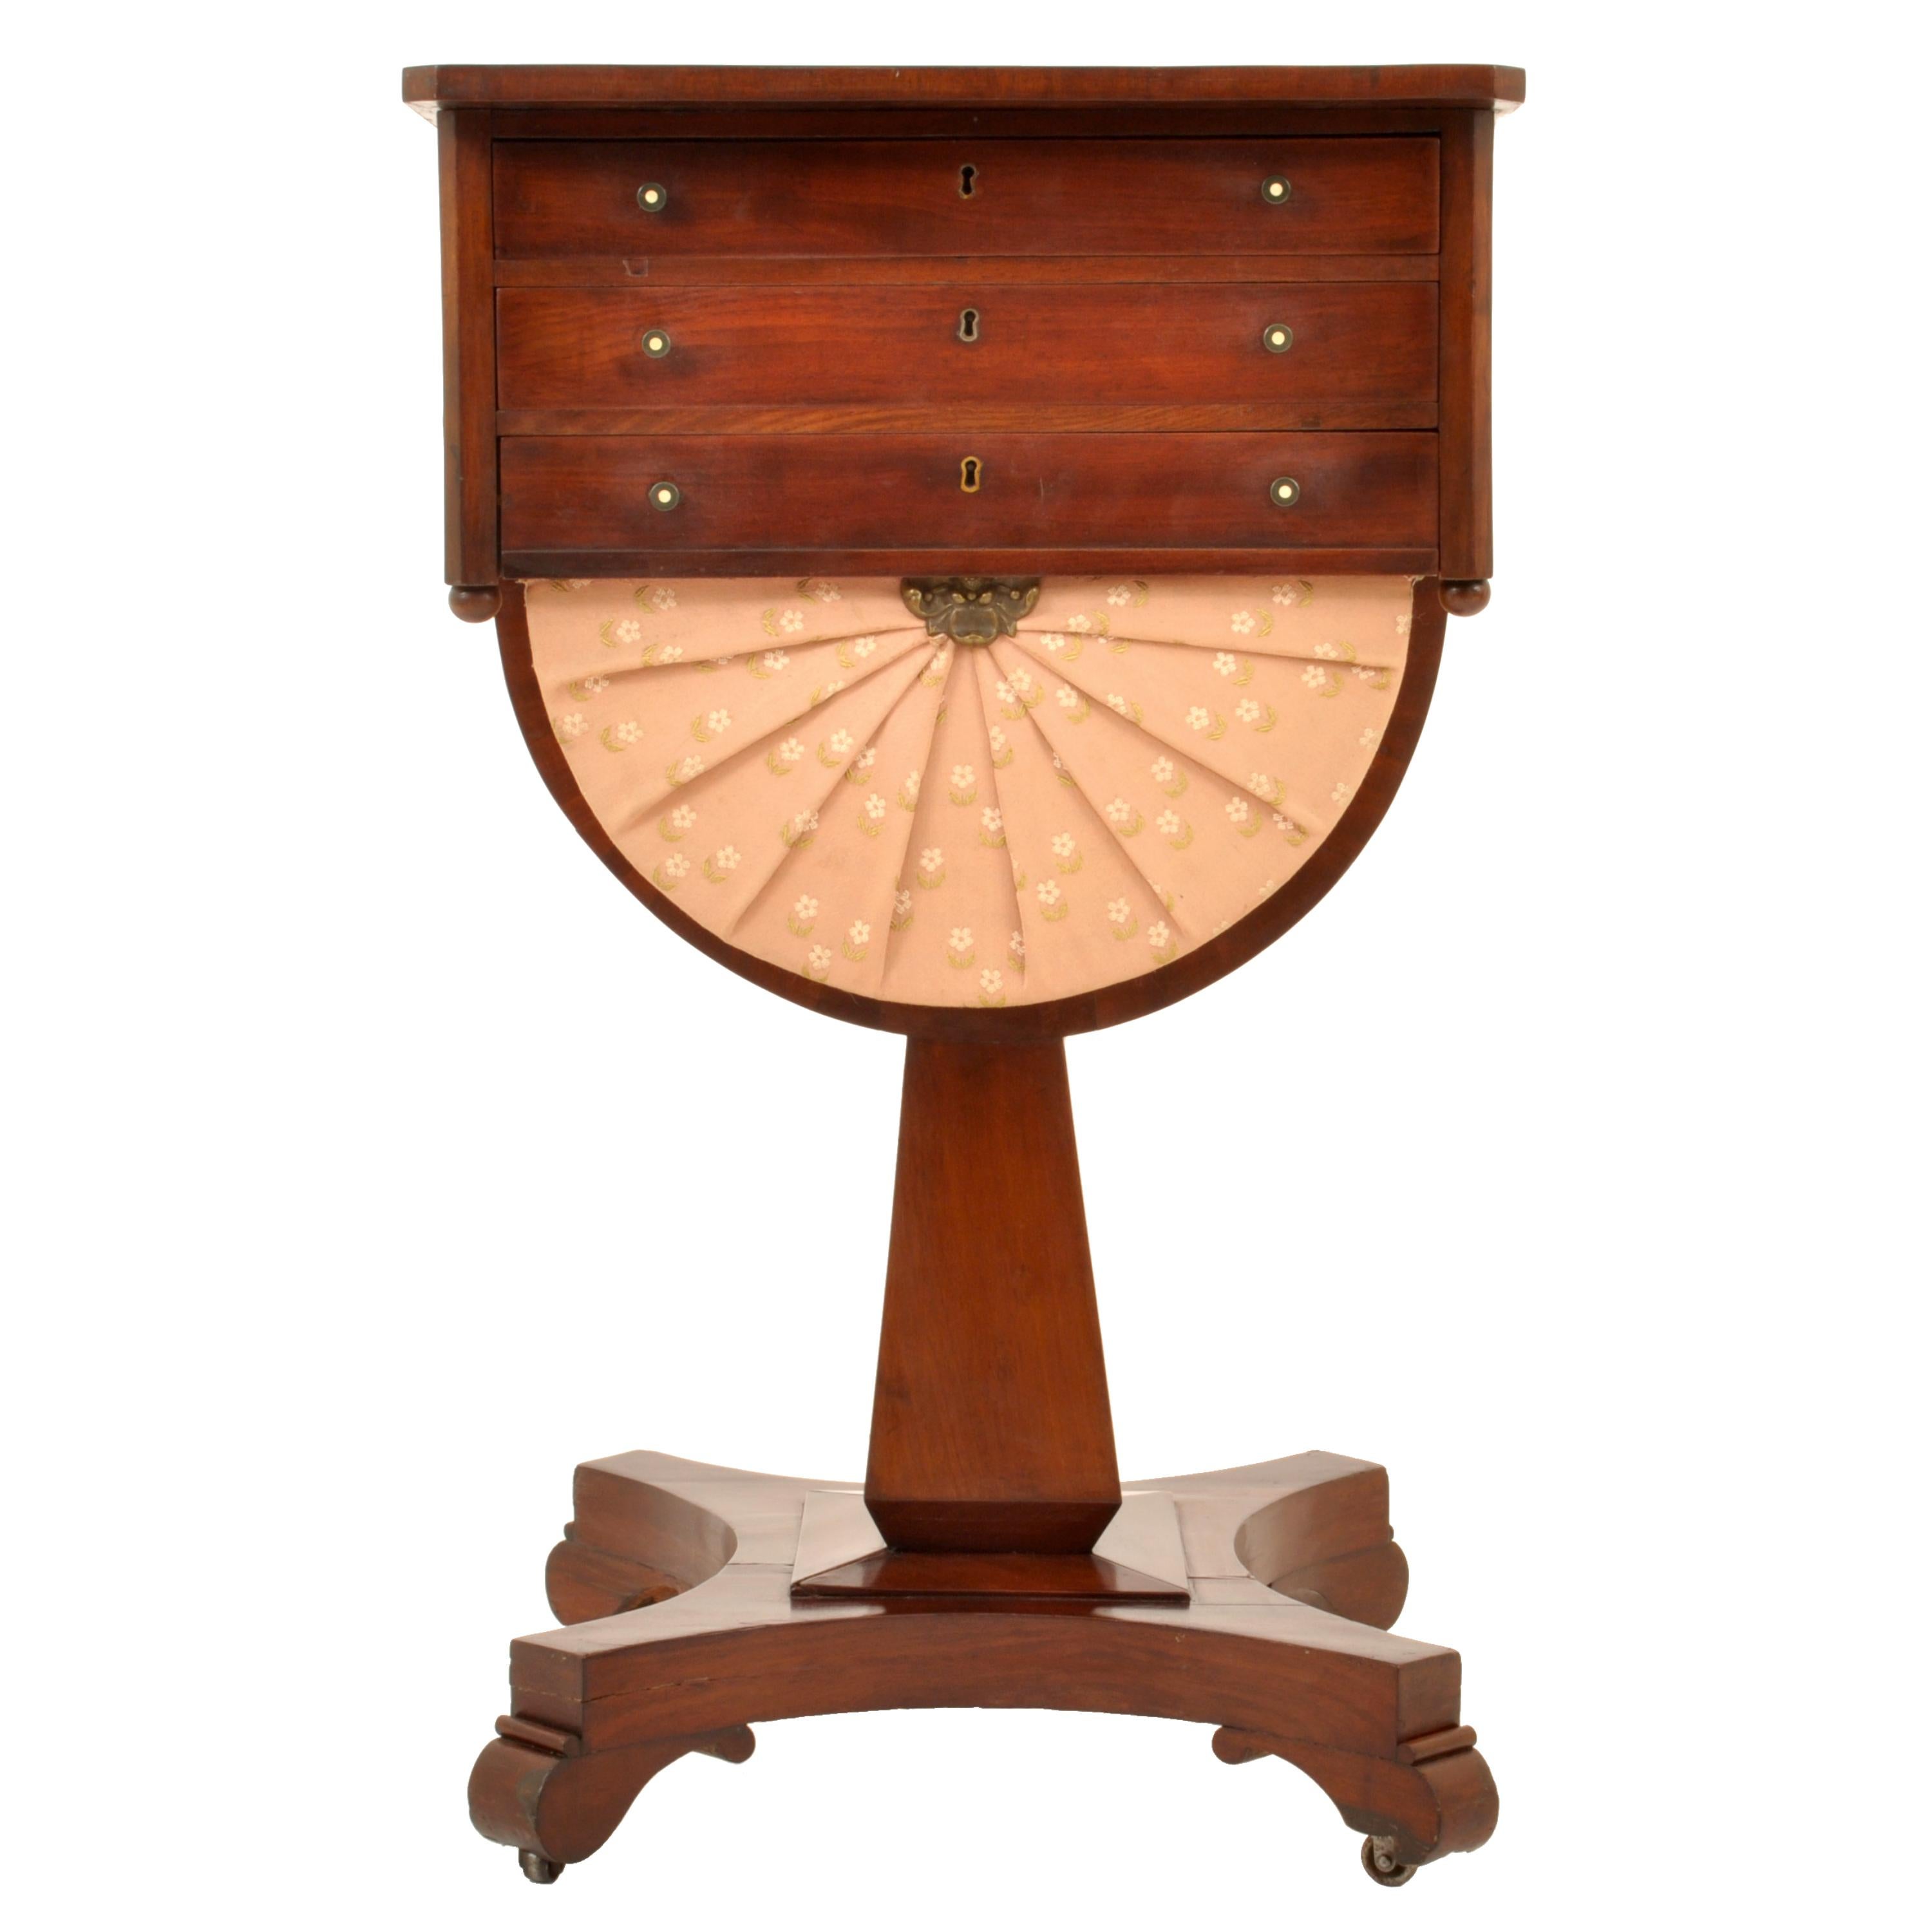 Carved Antique American Empire Mahogany Pedestal Sewing Work Table New York Circa 1840 For Sale